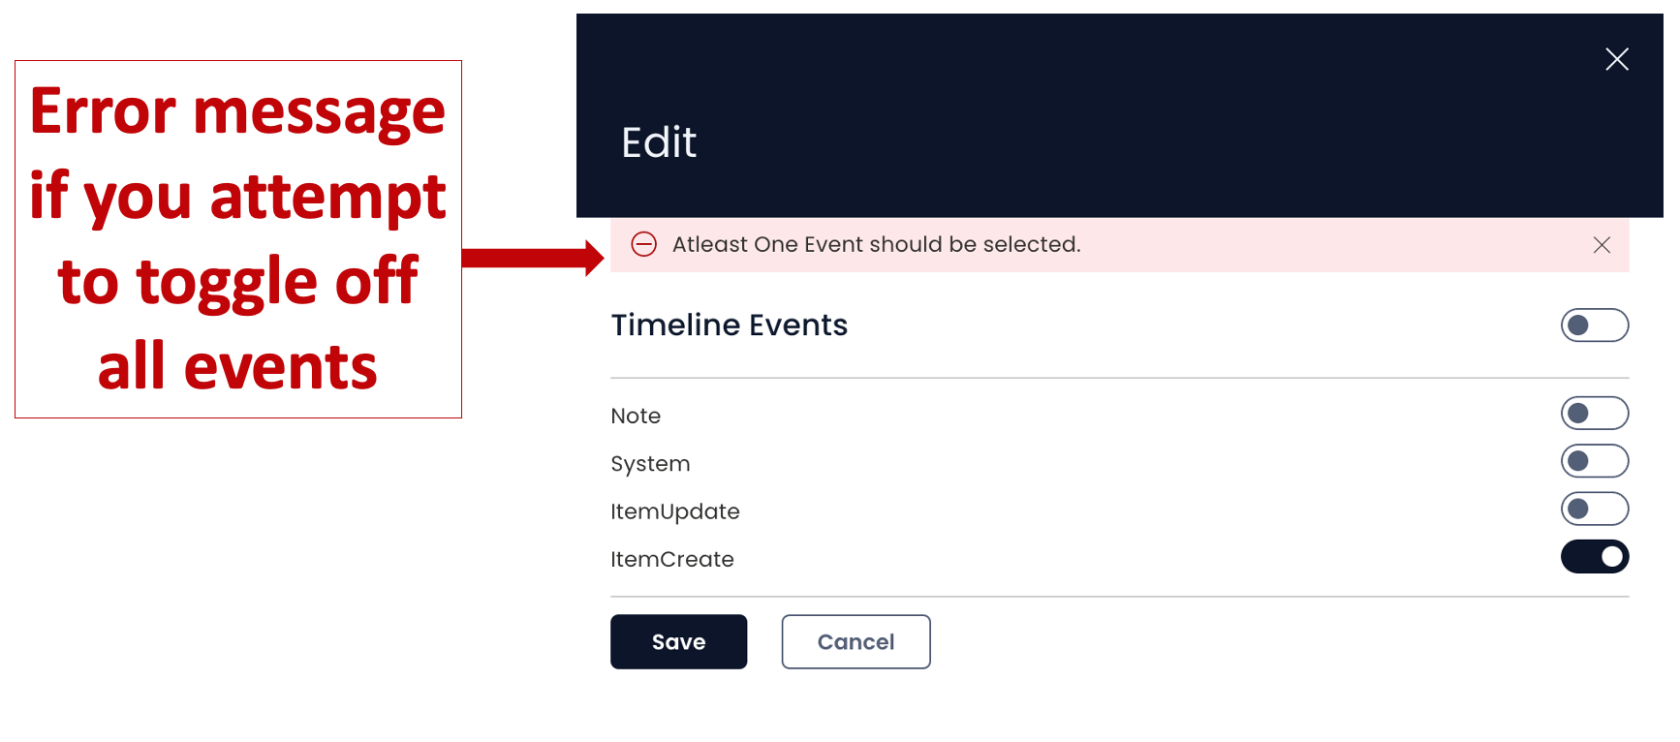 Error message with no events